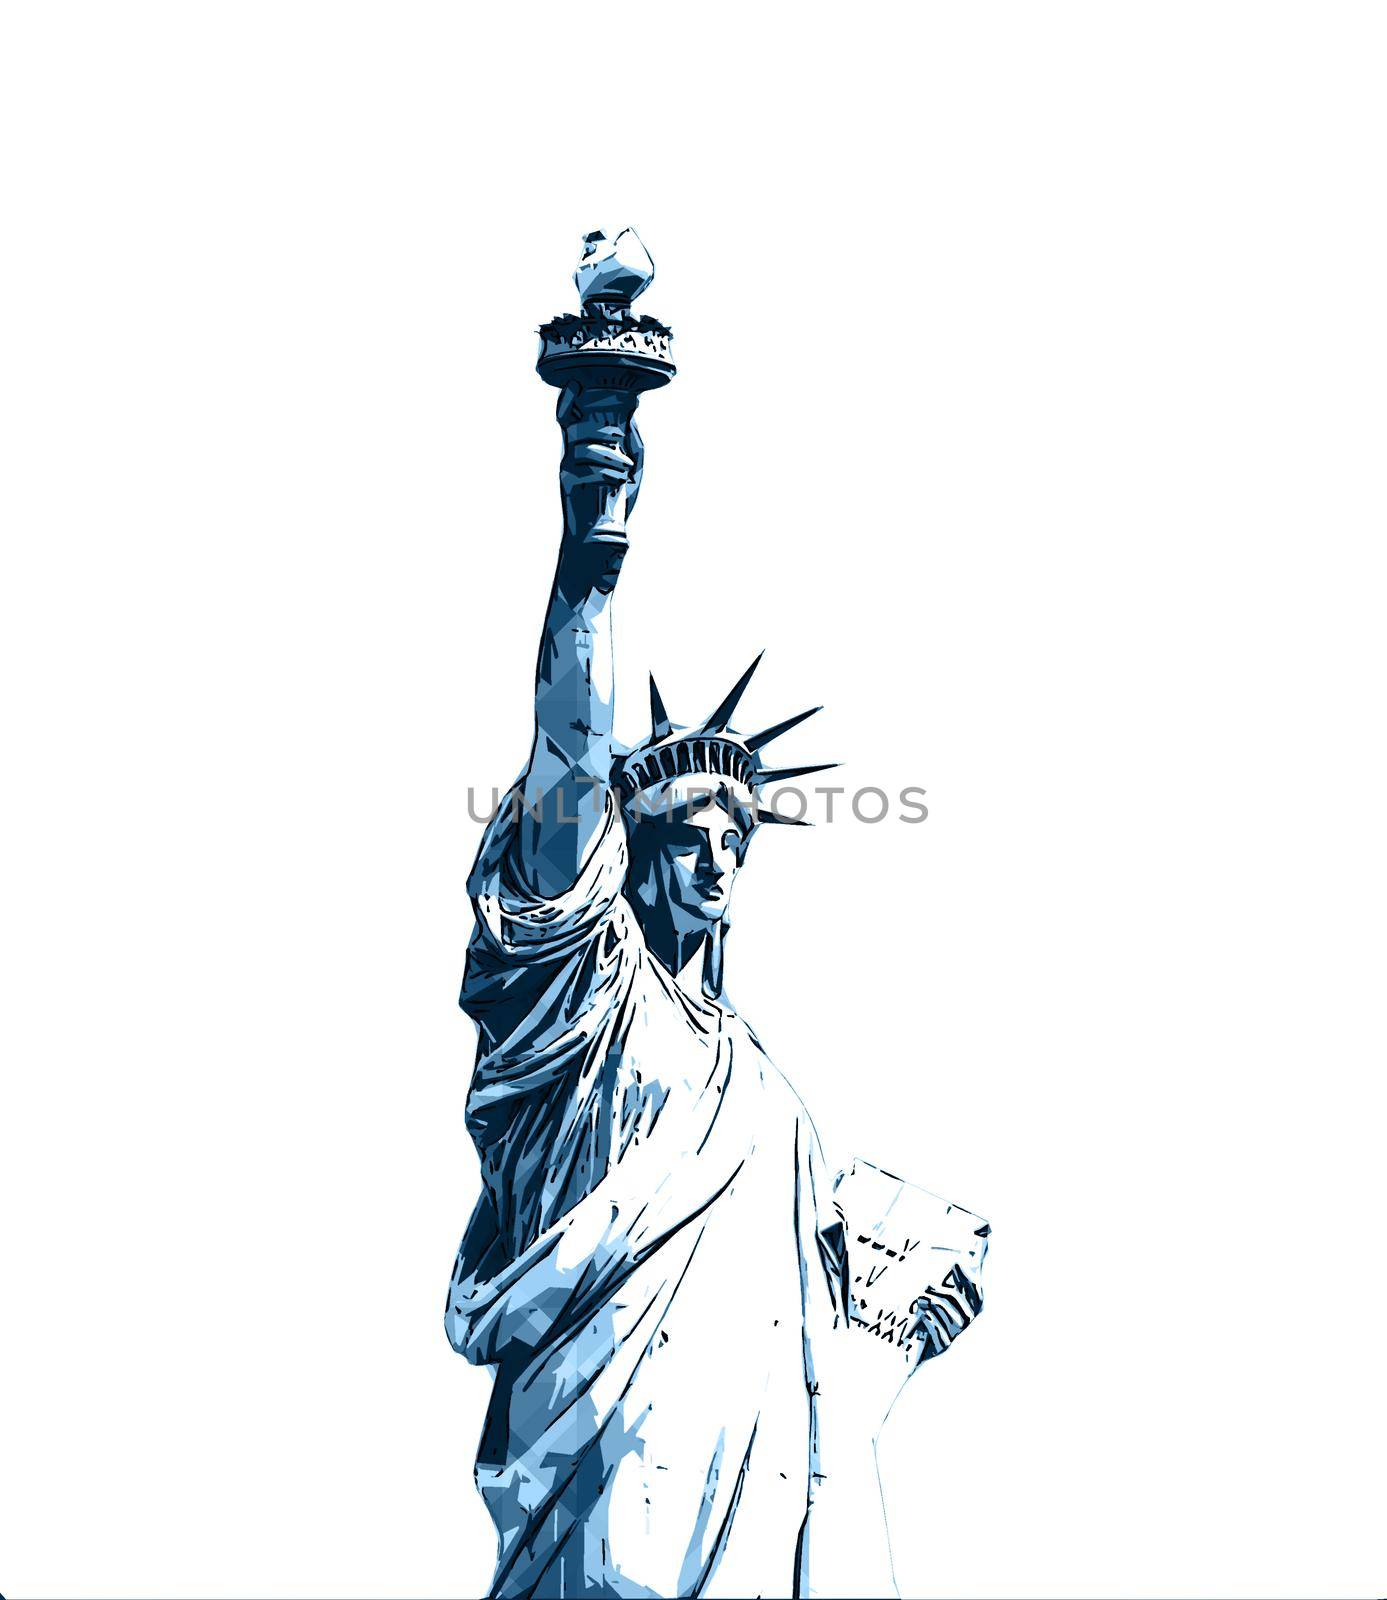 The Statue of Liberty isolated on white background, digital pop art design by Mariakray